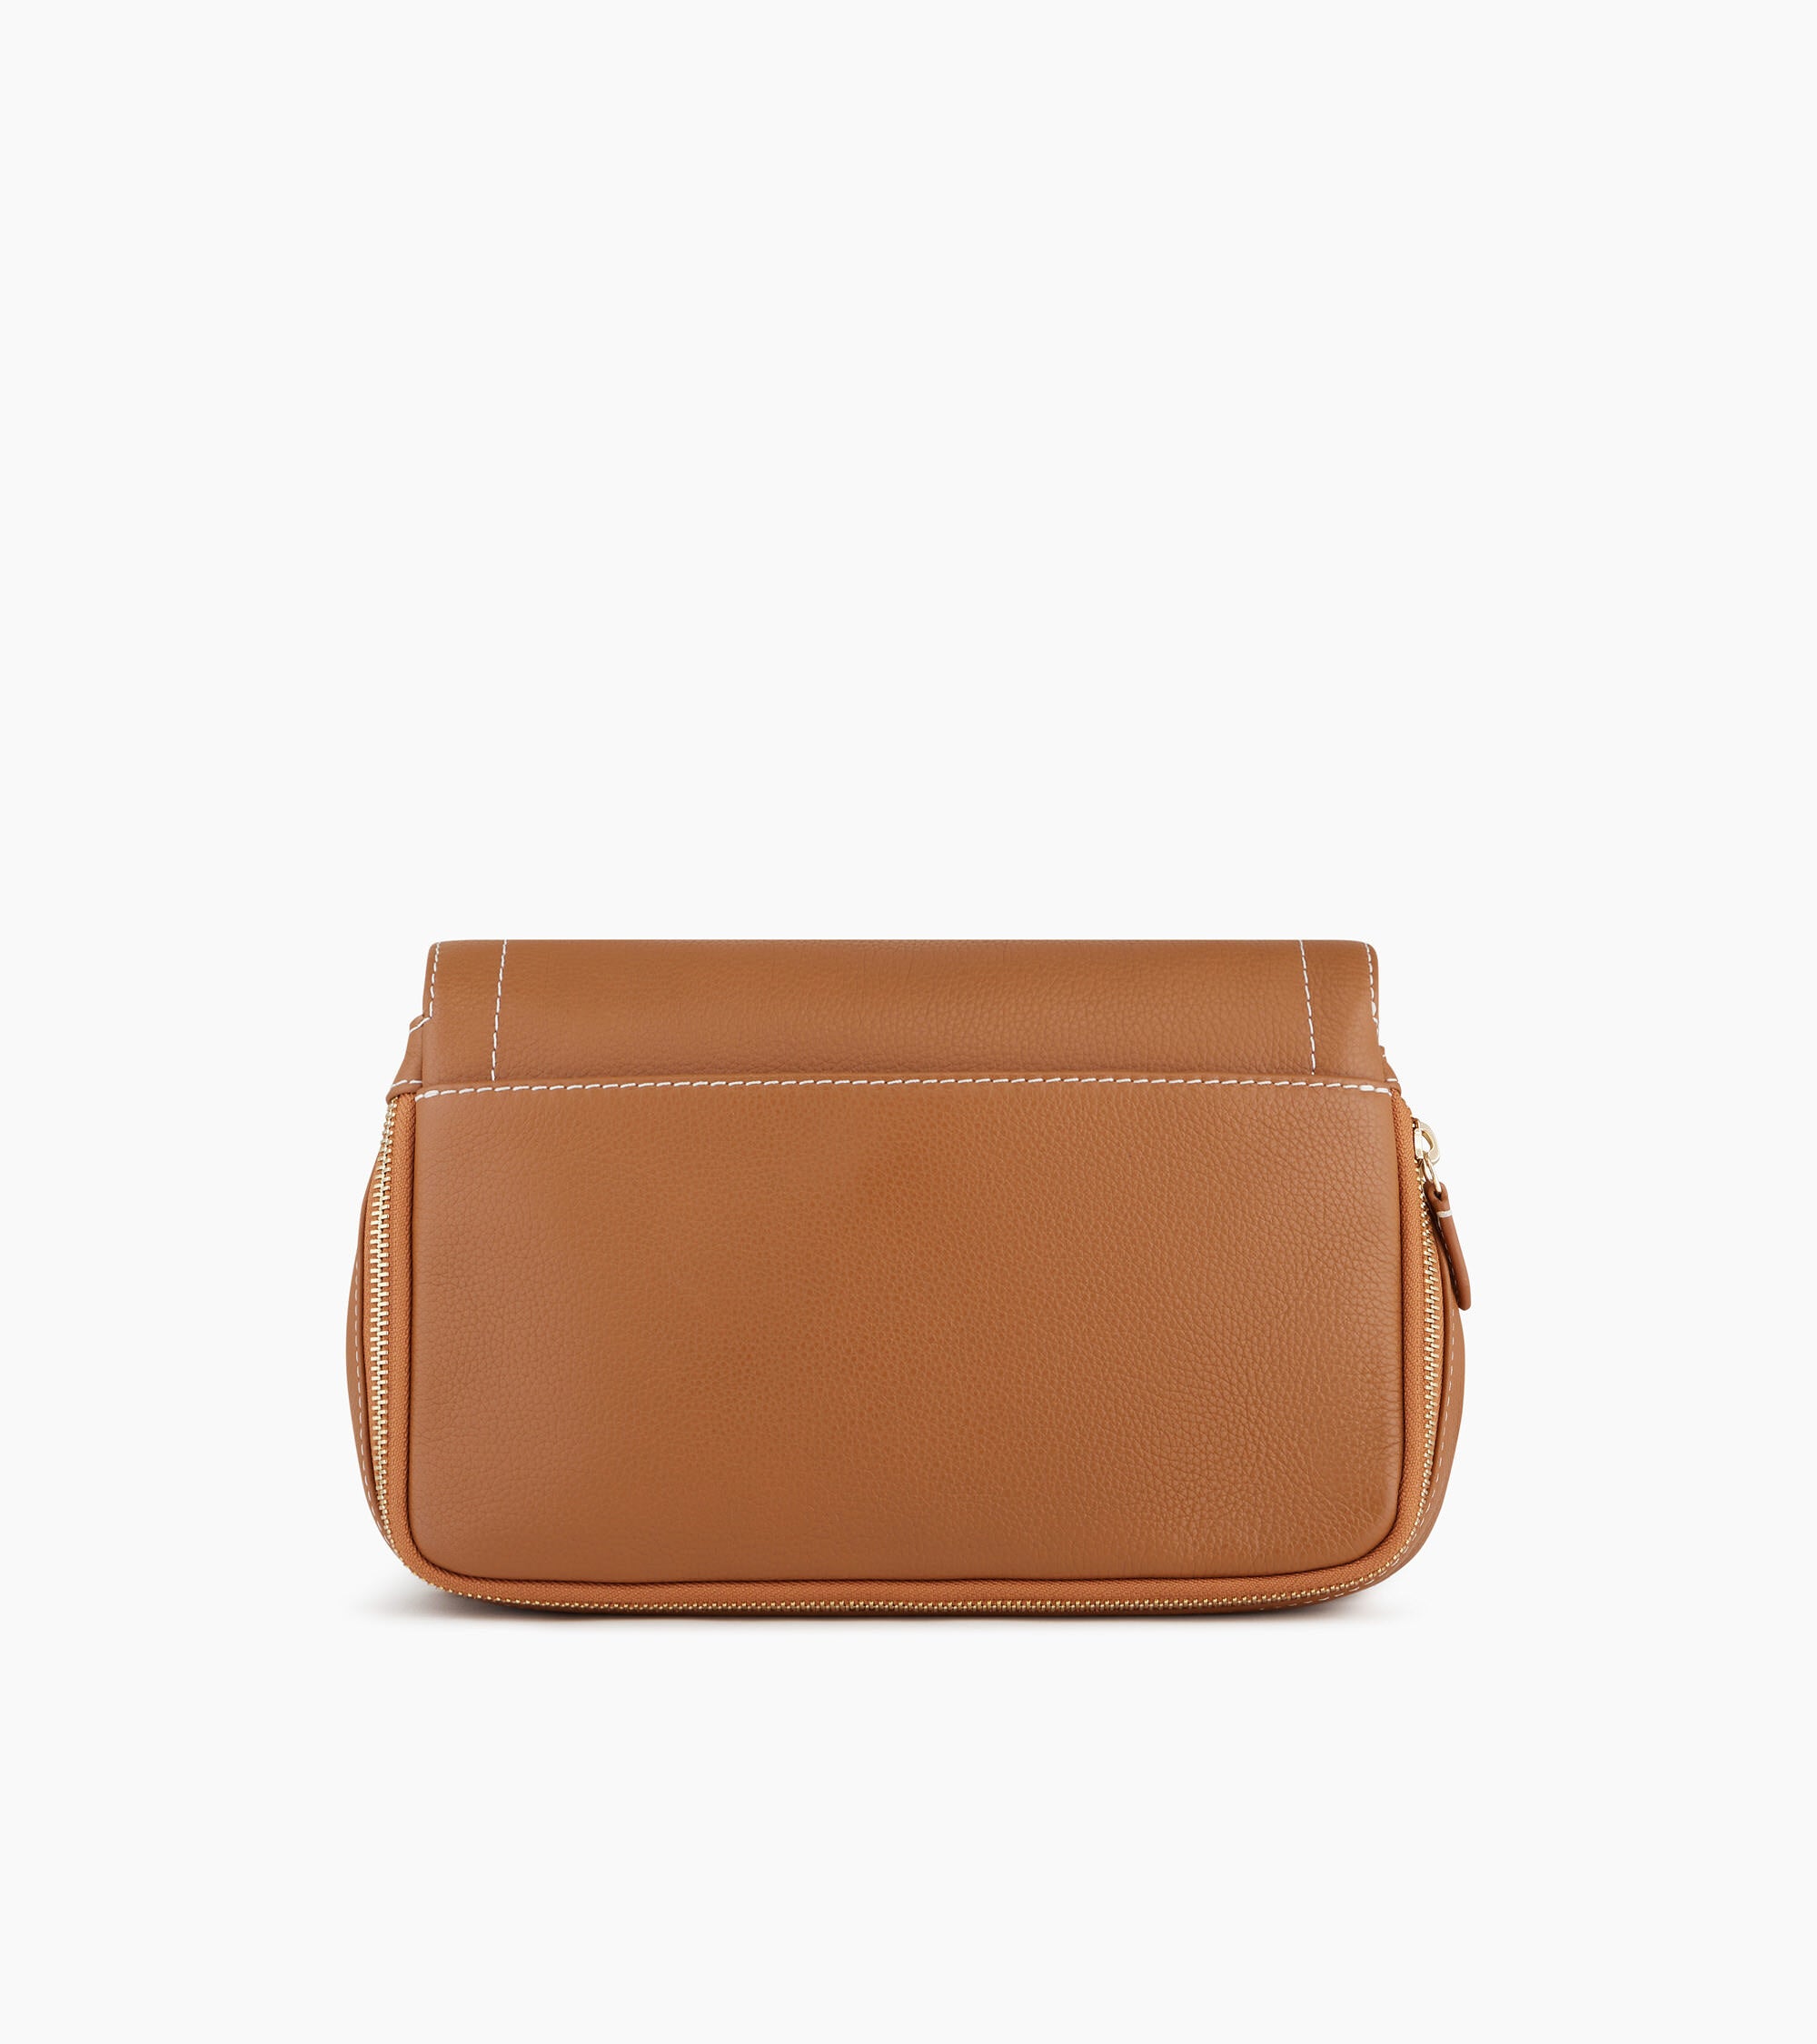 Simone small bag with crossbody strap in grained leather